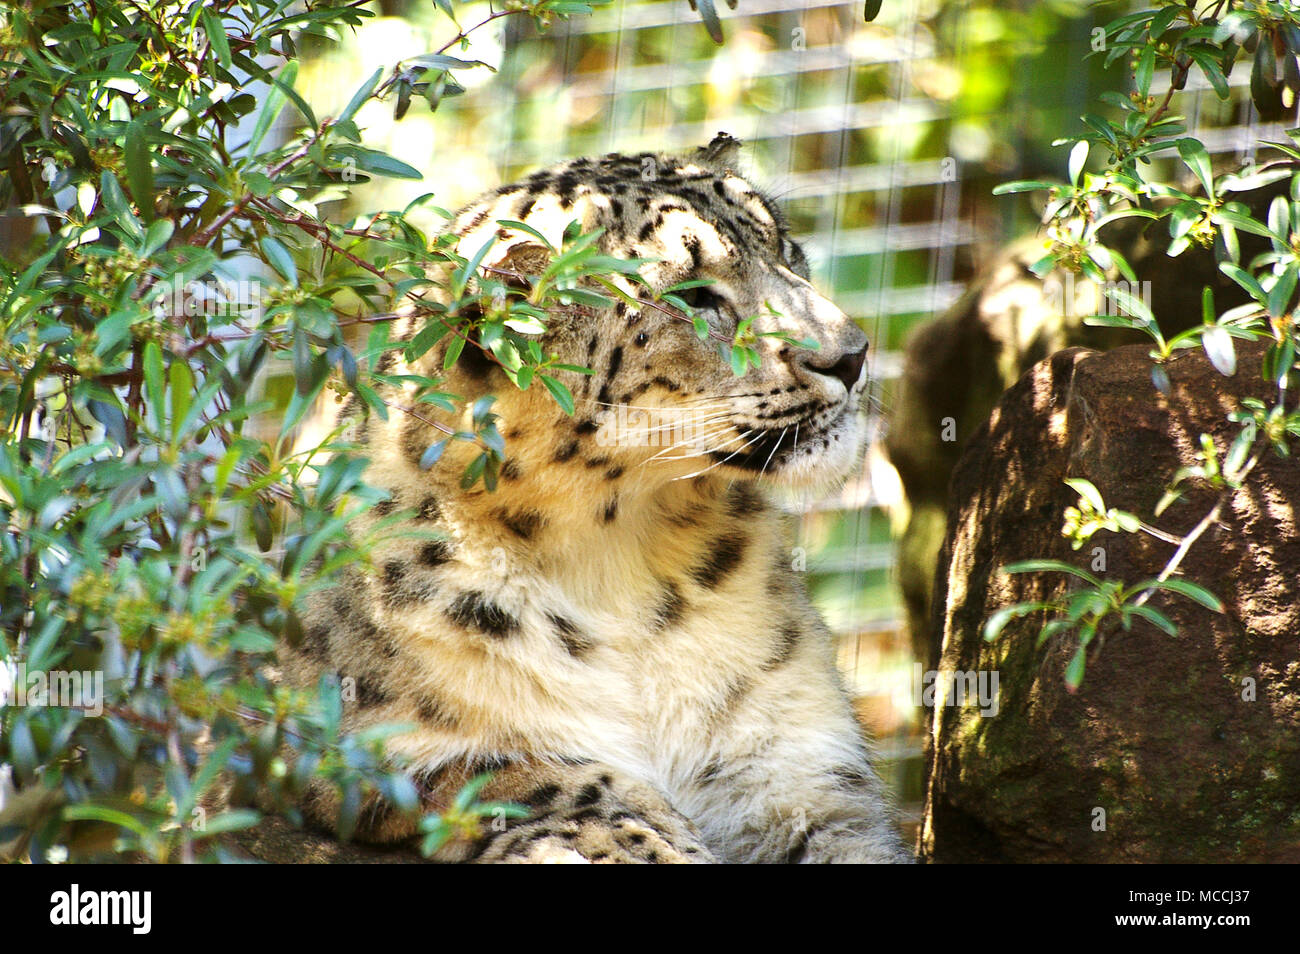 Snow Leopard in bushes Stock Photo